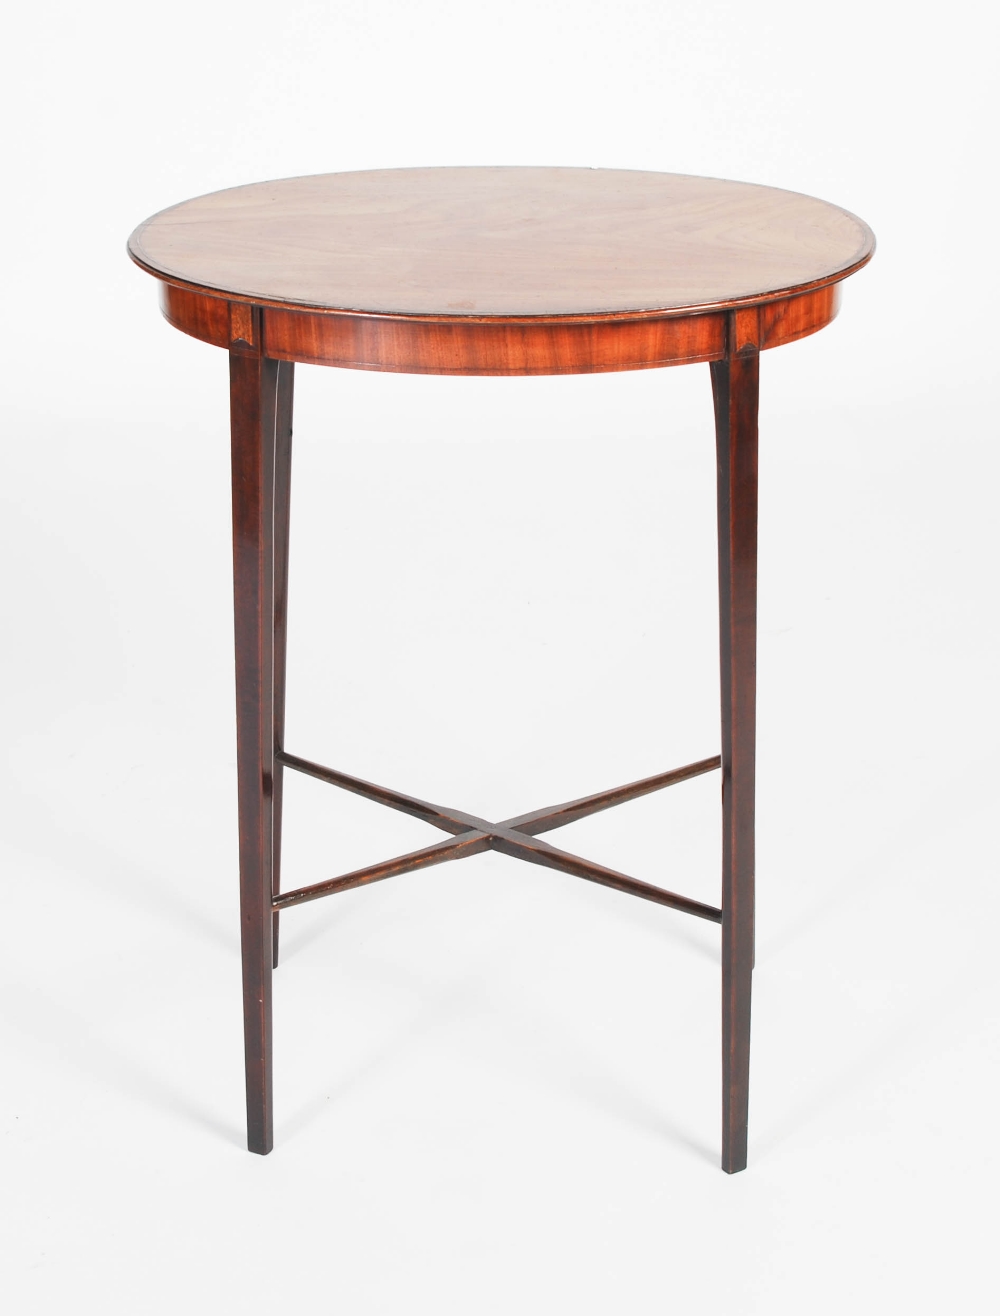 A 19th century mahogany occasional table, the oval-shaped top with boxwood lined and rosewood banded - Image 6 of 6